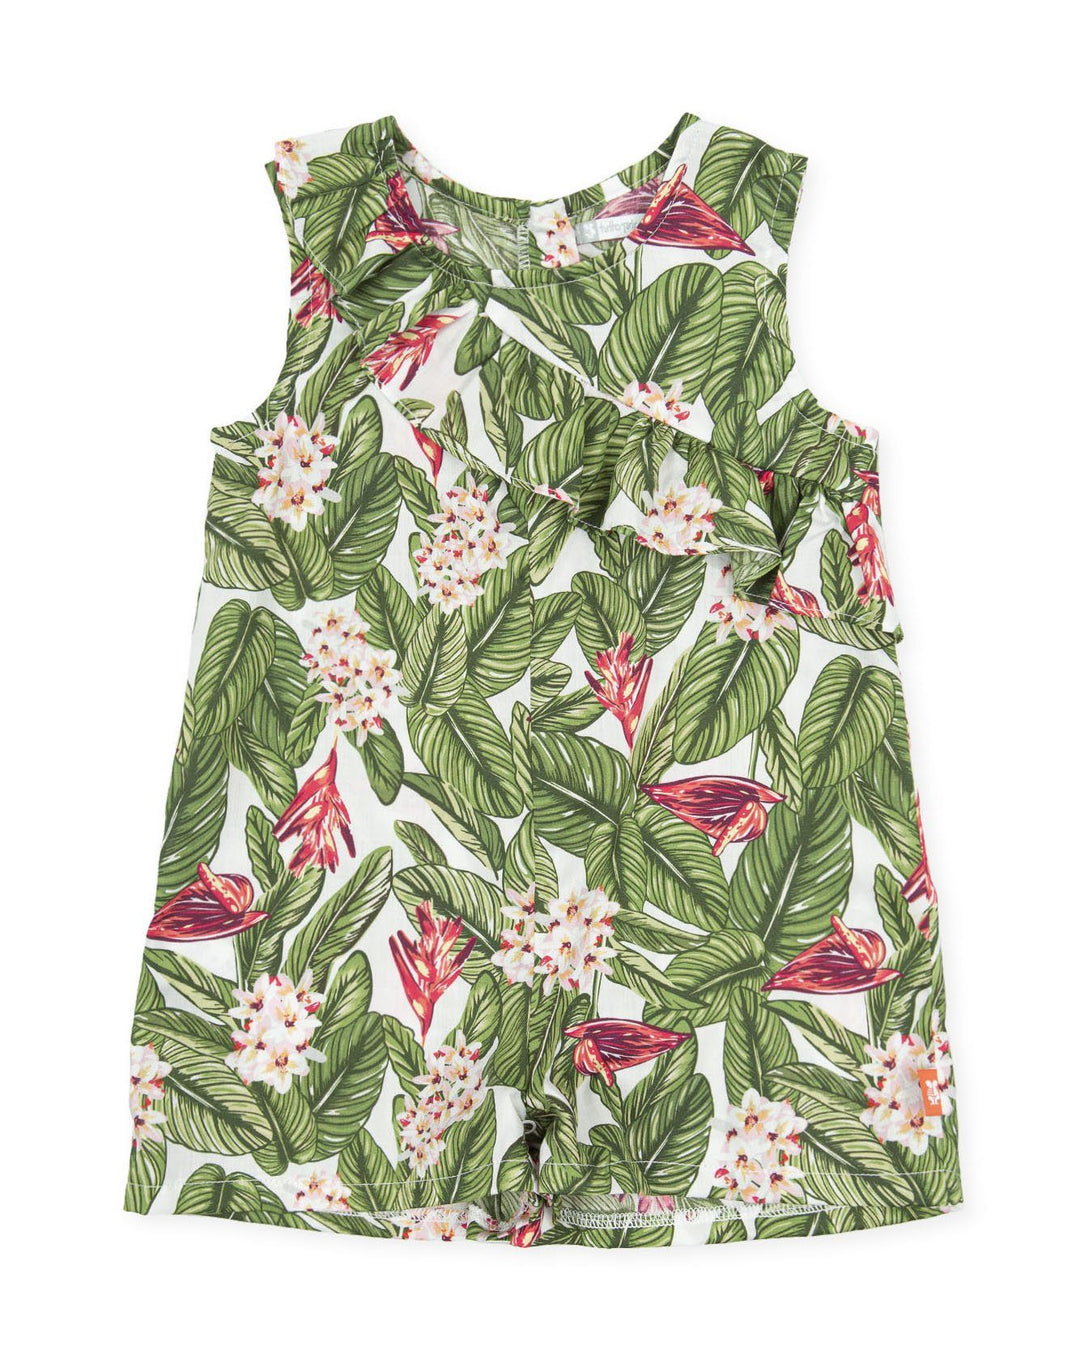 Tutto Piccolo "Nola" Green Palm Leaf Playsuit | Millie and John